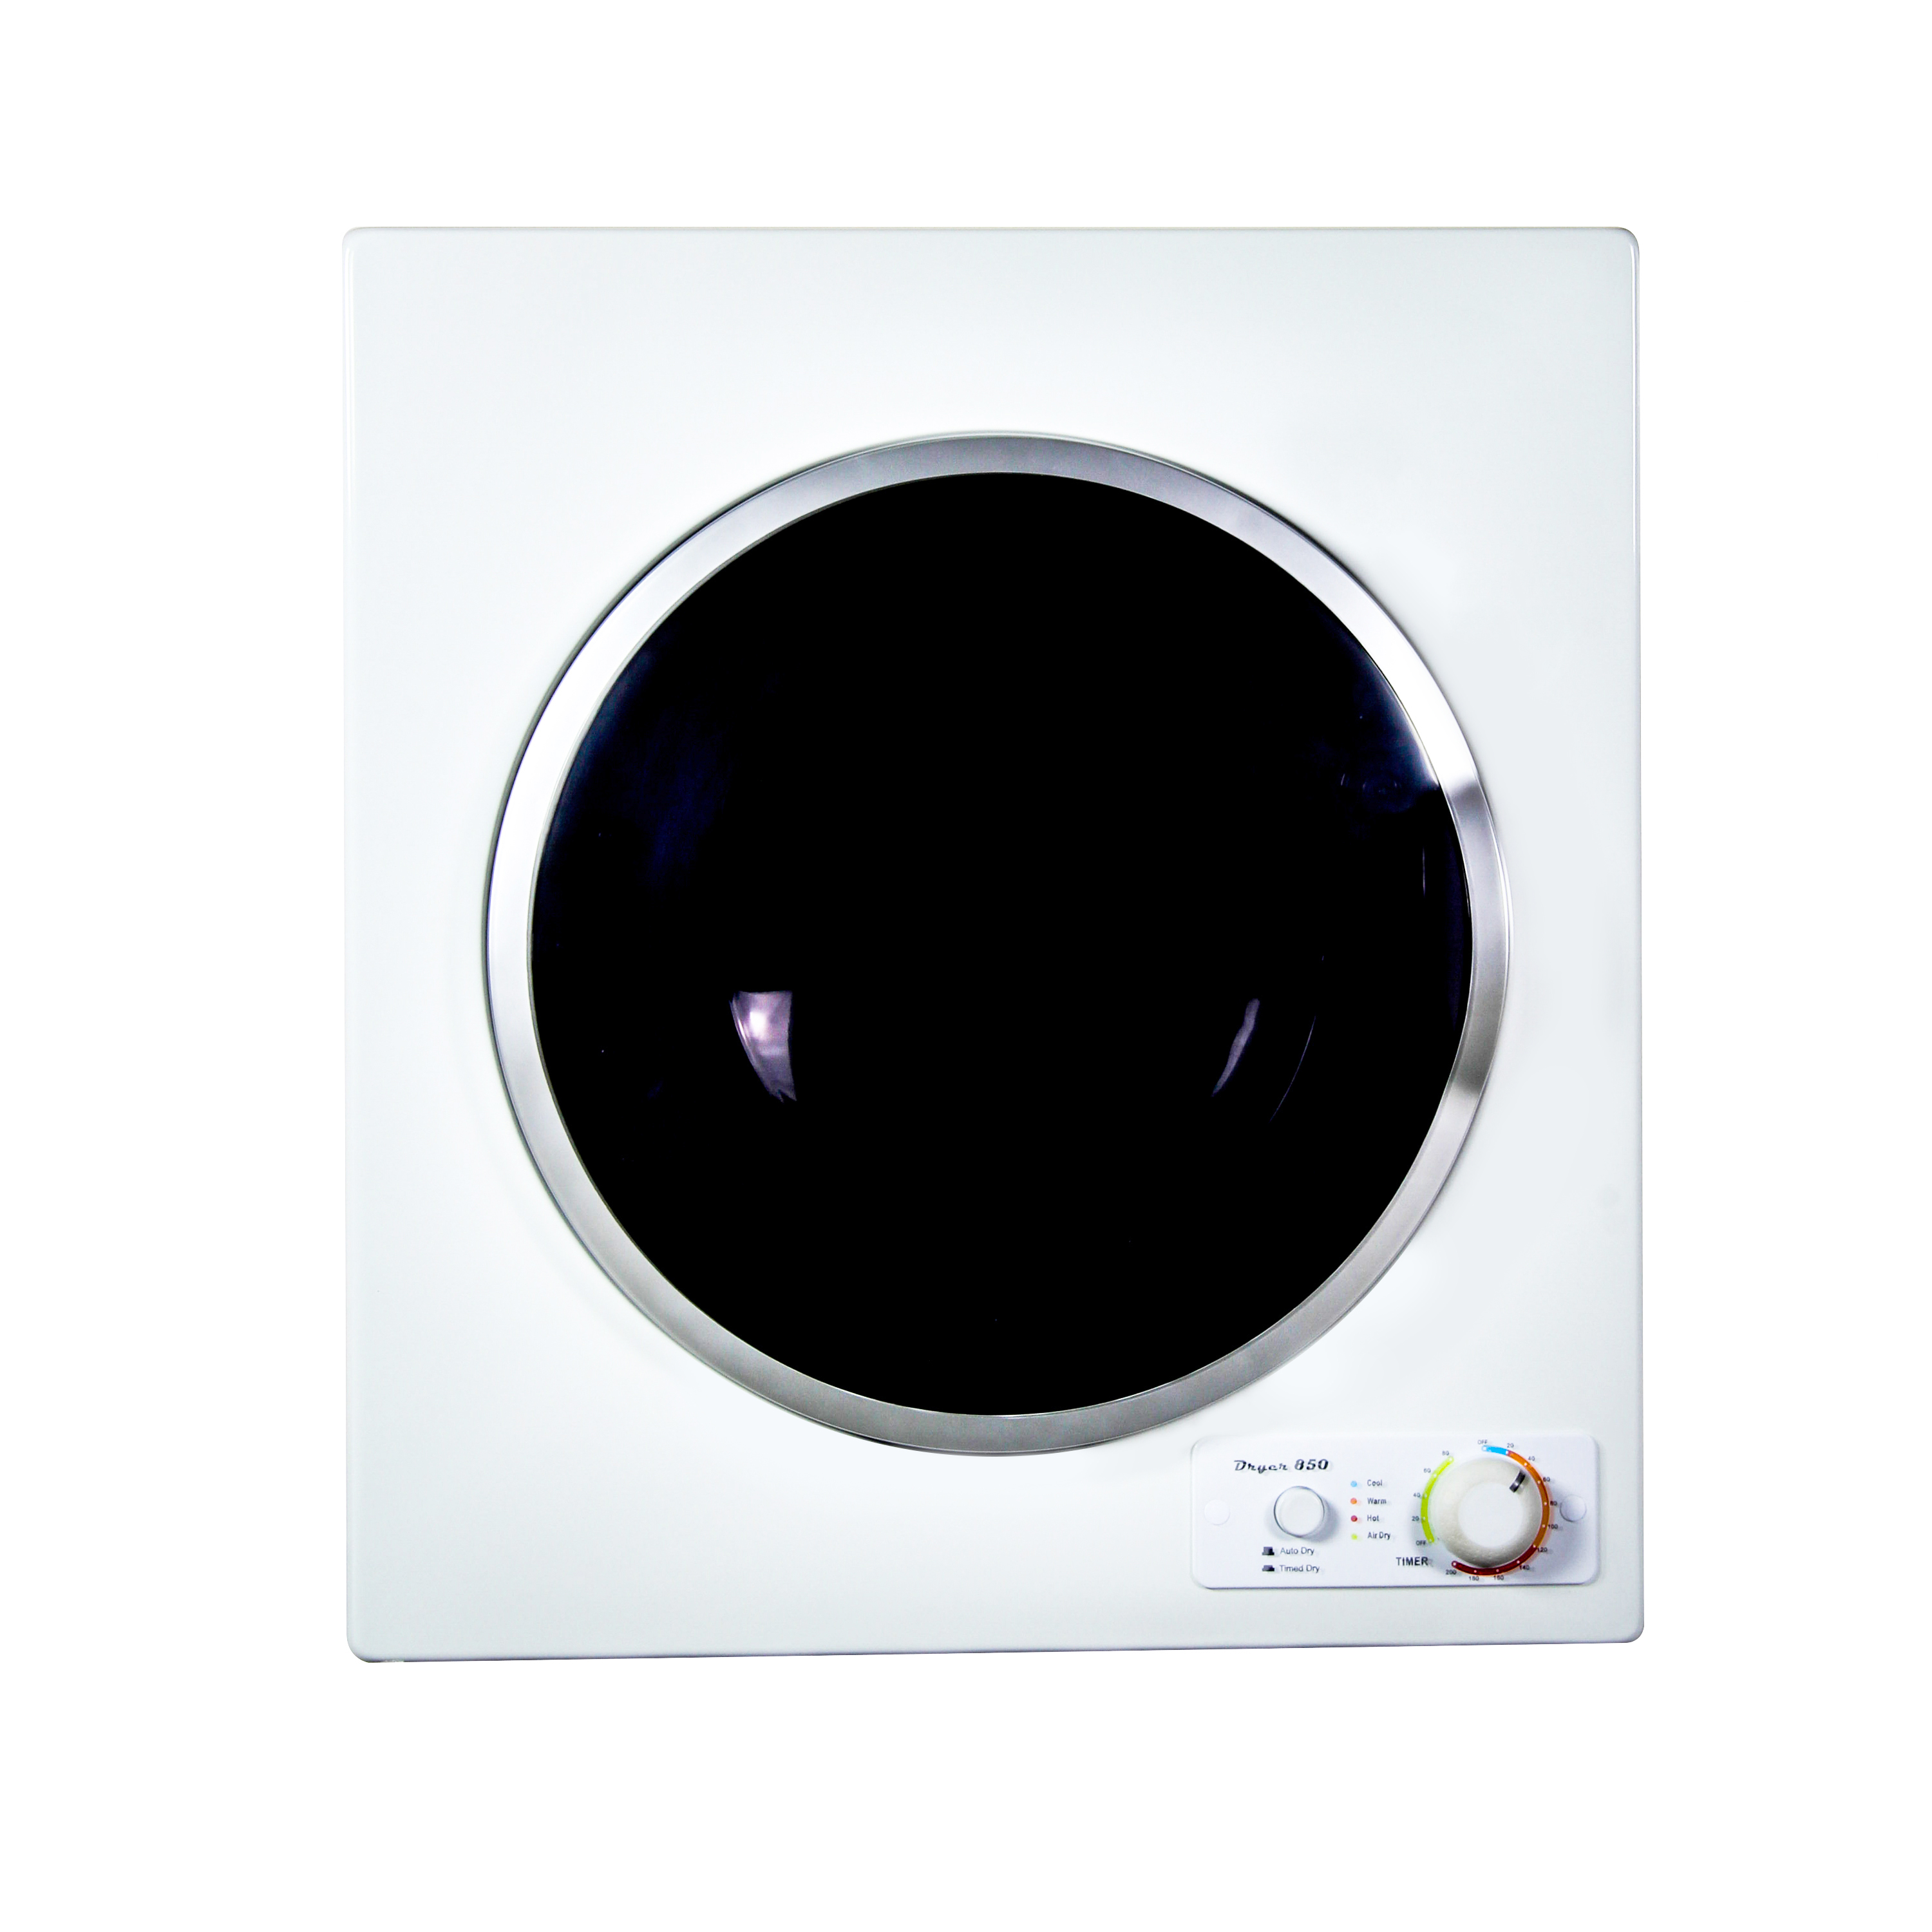 Conserv Compact Dryer CD 850